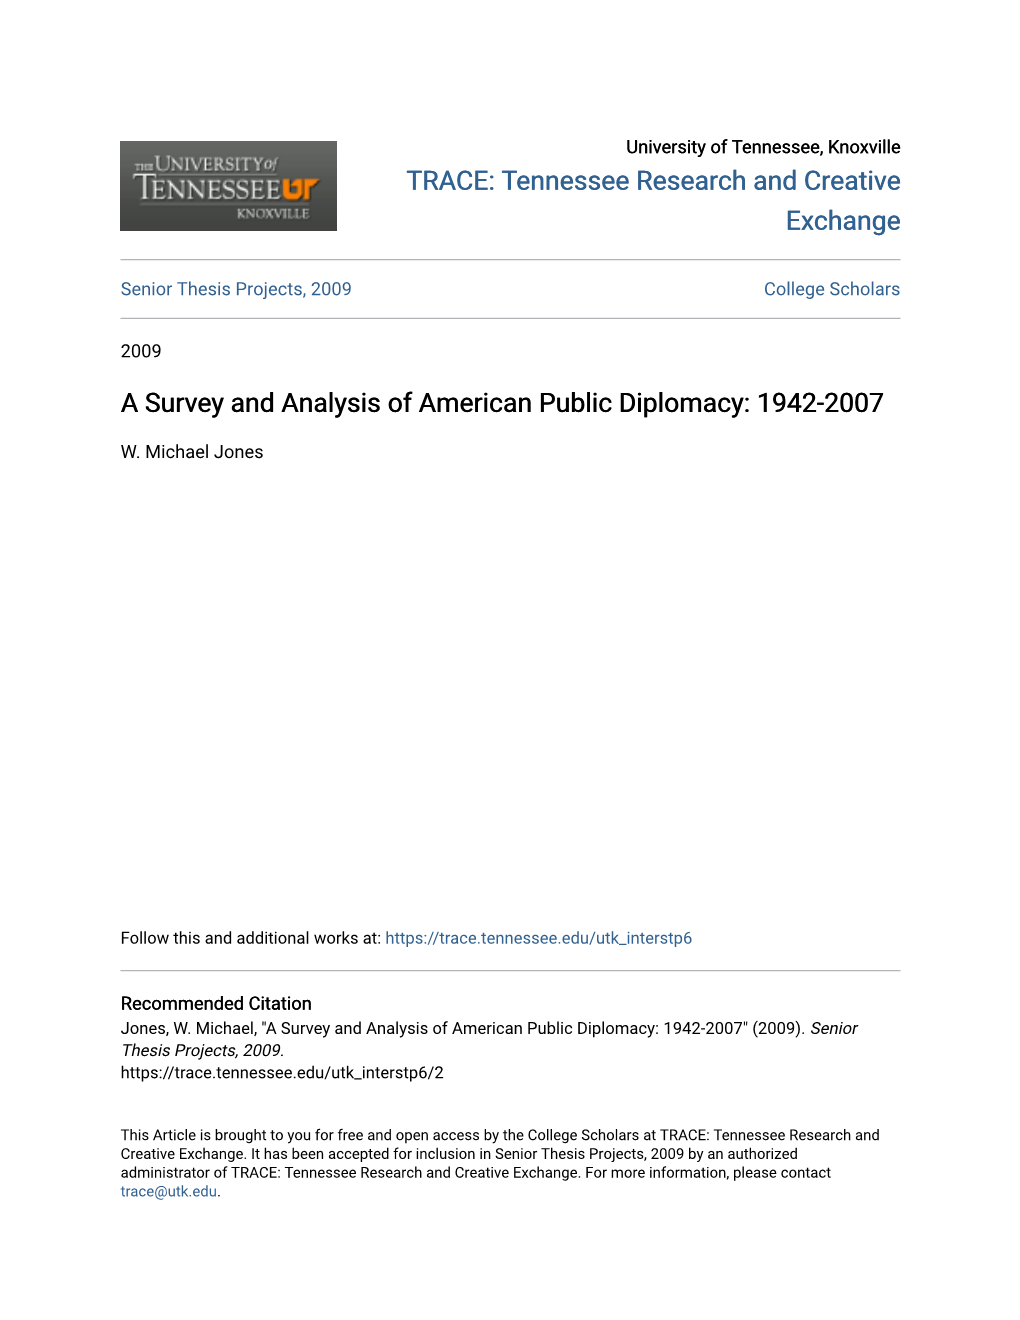 A Survey and Analysis of American Public Diplomacy: 1942-2007